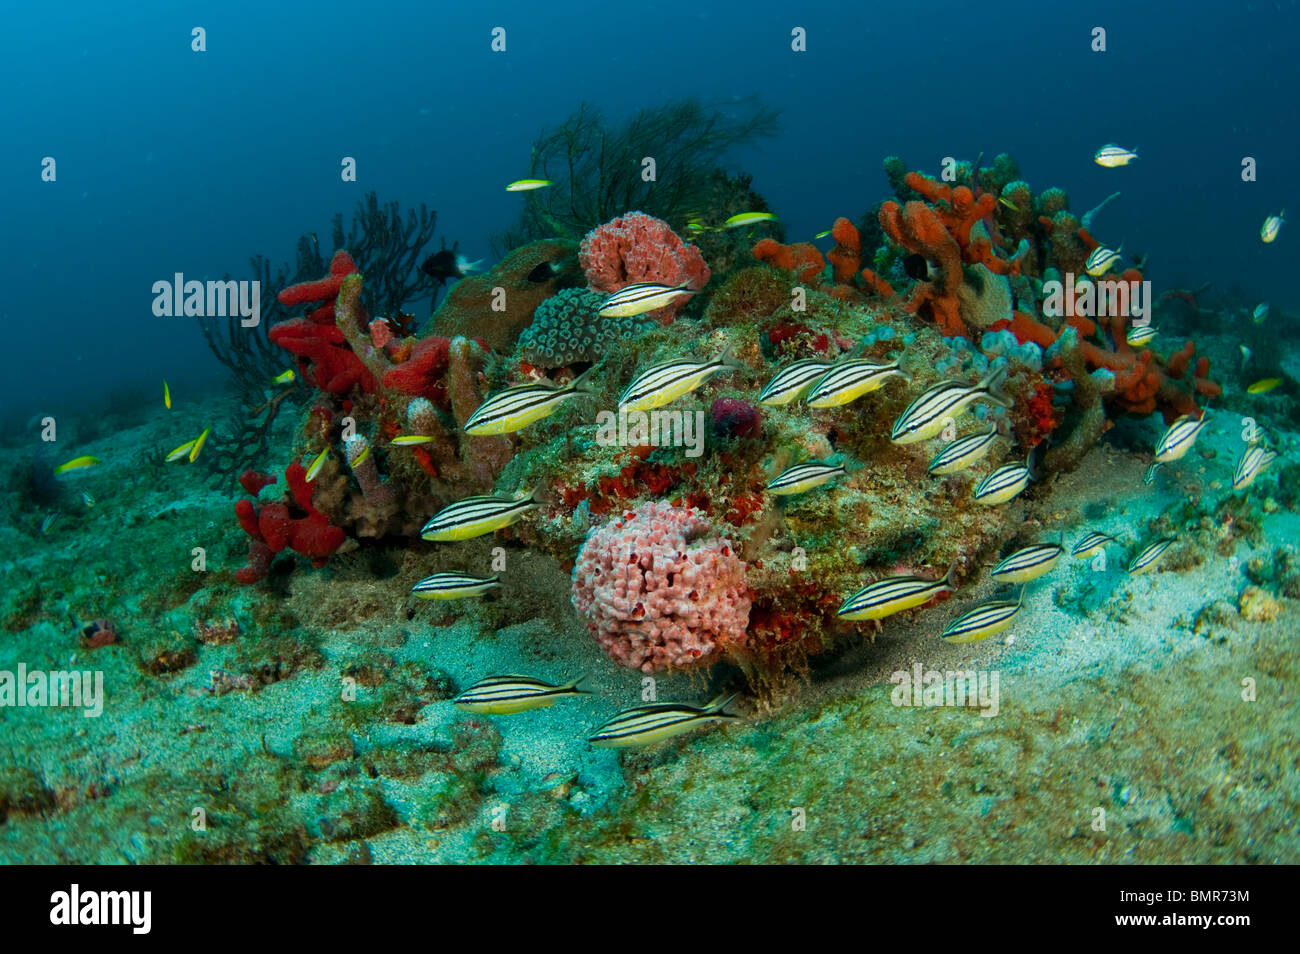 Coral Reef in Palm Beach, Florida with an assortment of marine invertebrates and fish species. Stock Photo